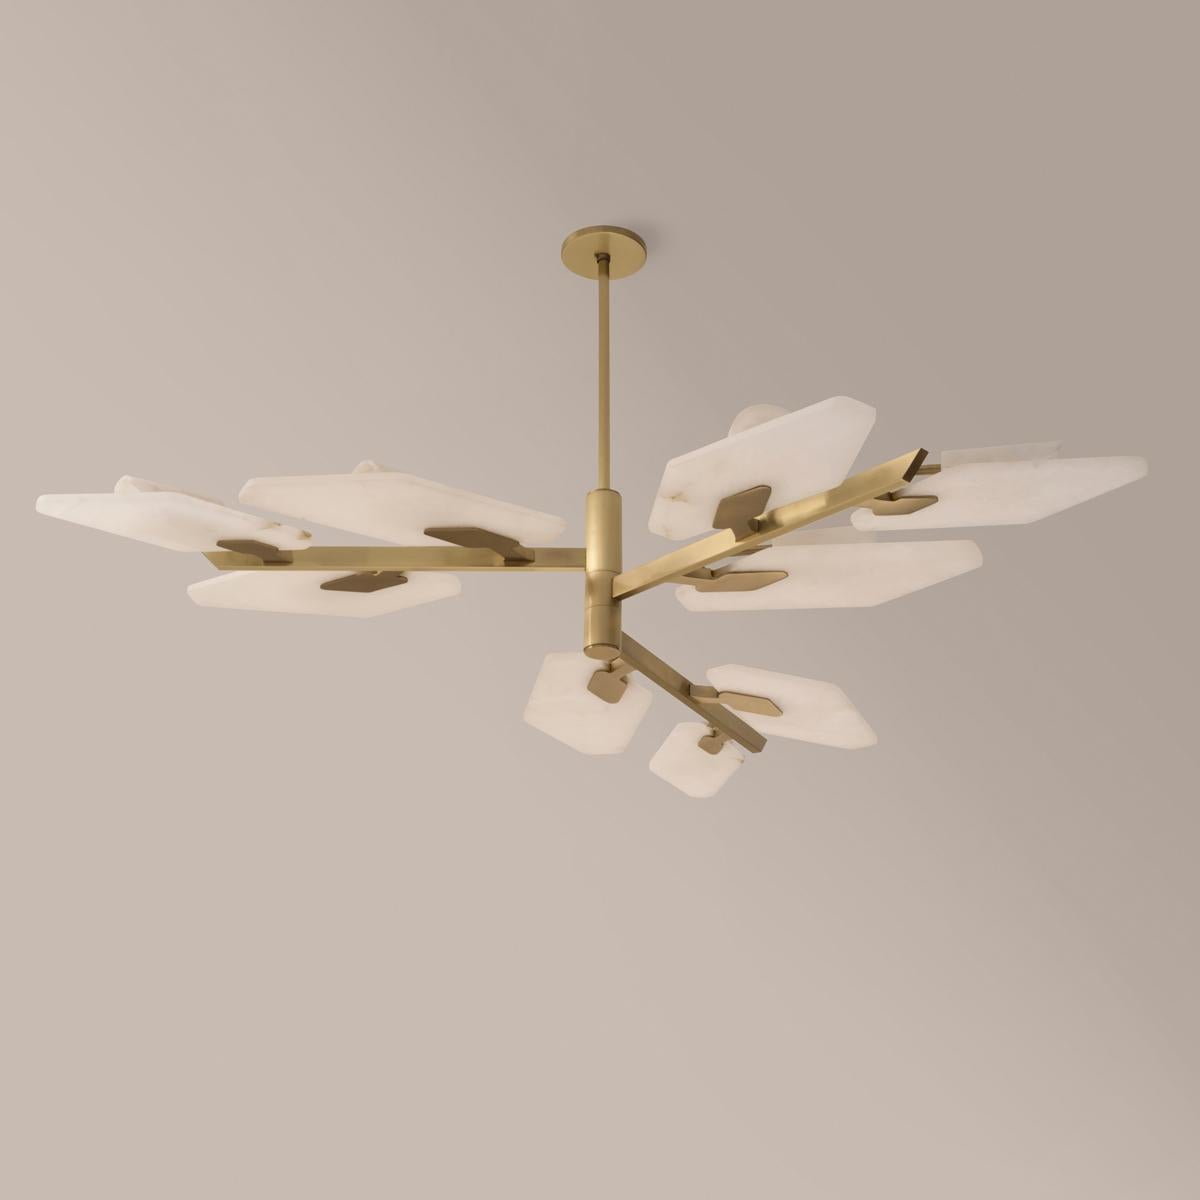 Italian Leaf Ceiling Light by Gaspare Asaro-Satin Brass Finish For Sale